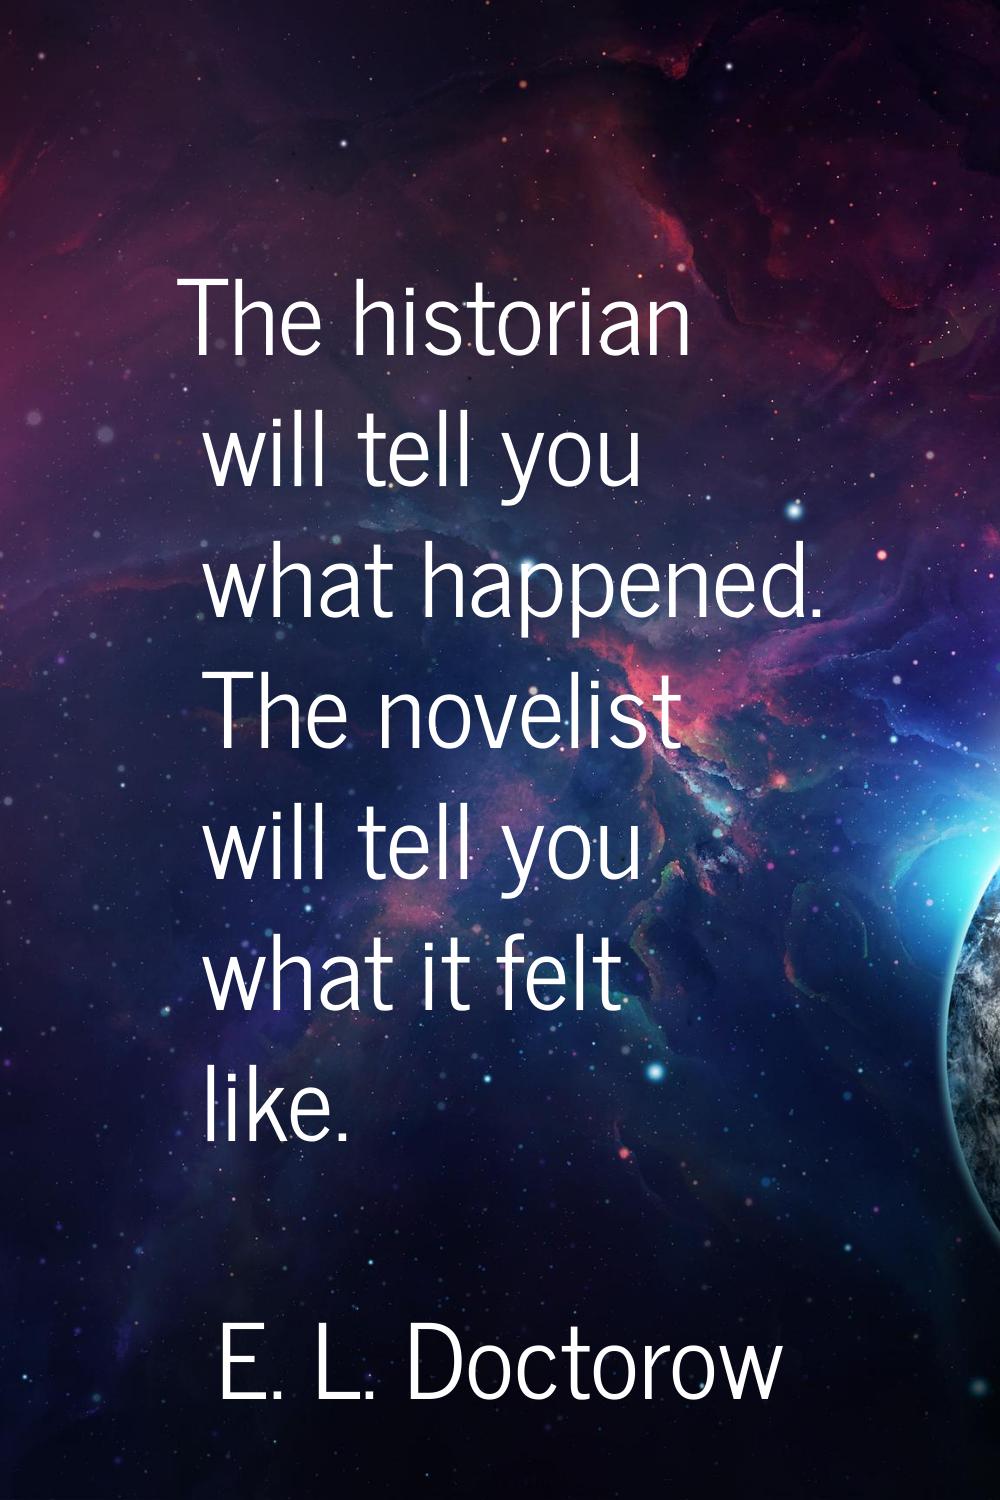 The historian will tell you what happened. The novelist will tell you what it felt like.